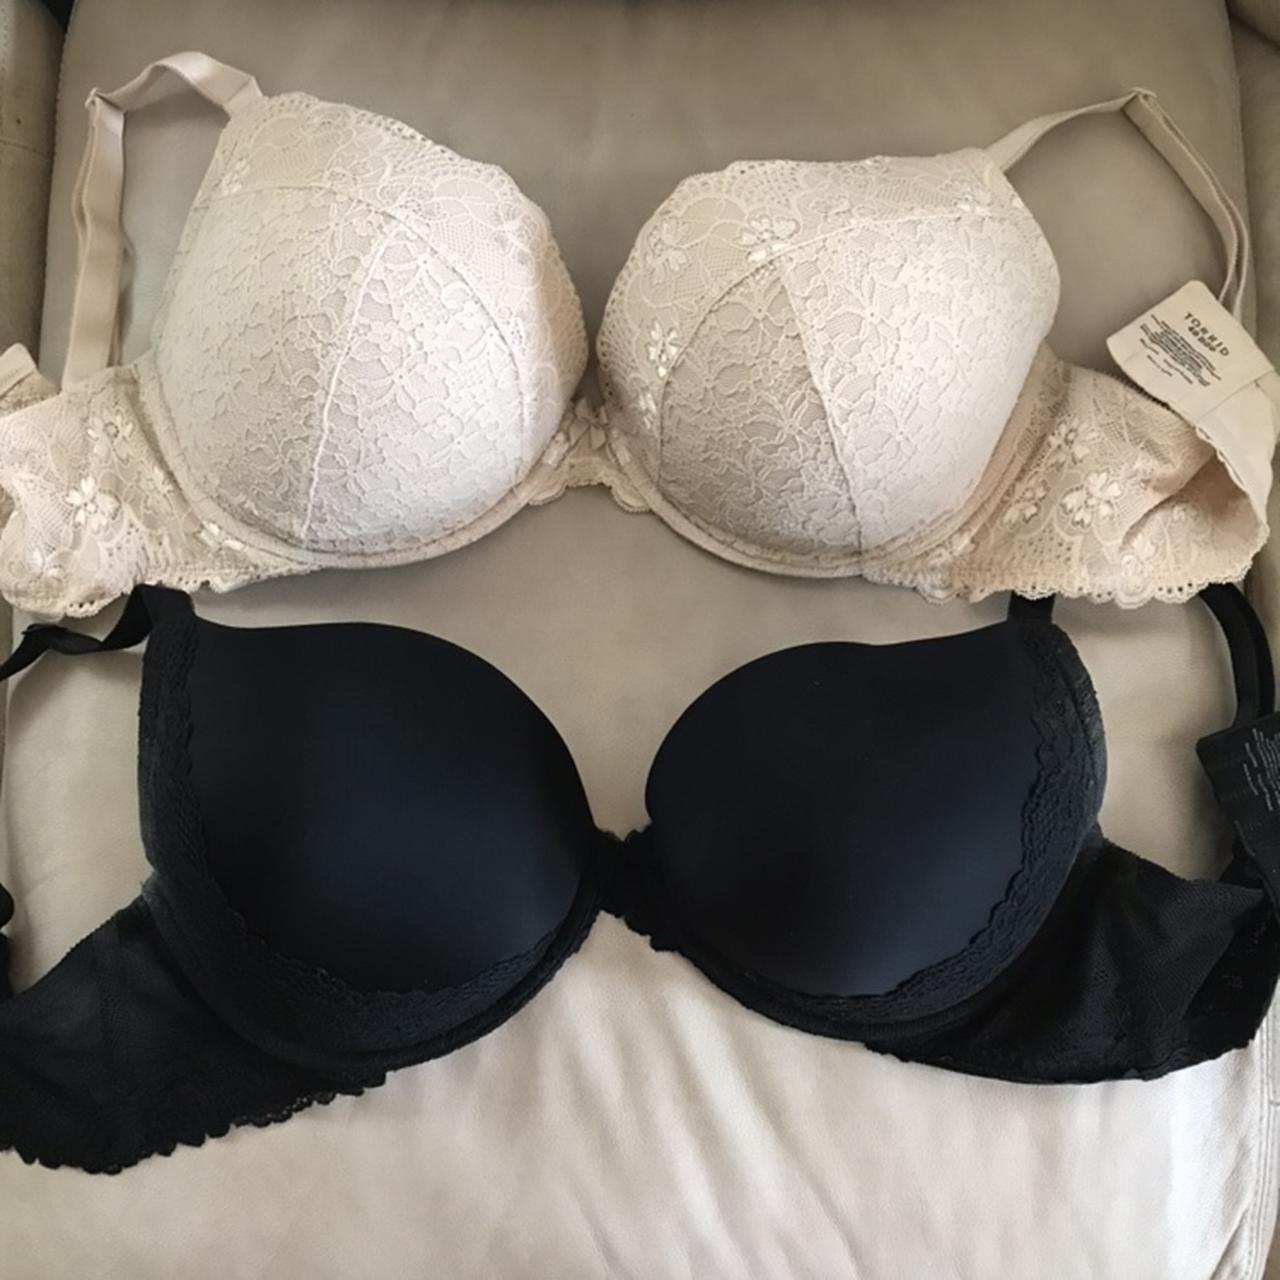 Torrid bras - message about pricing, (1- $35 | 2 for